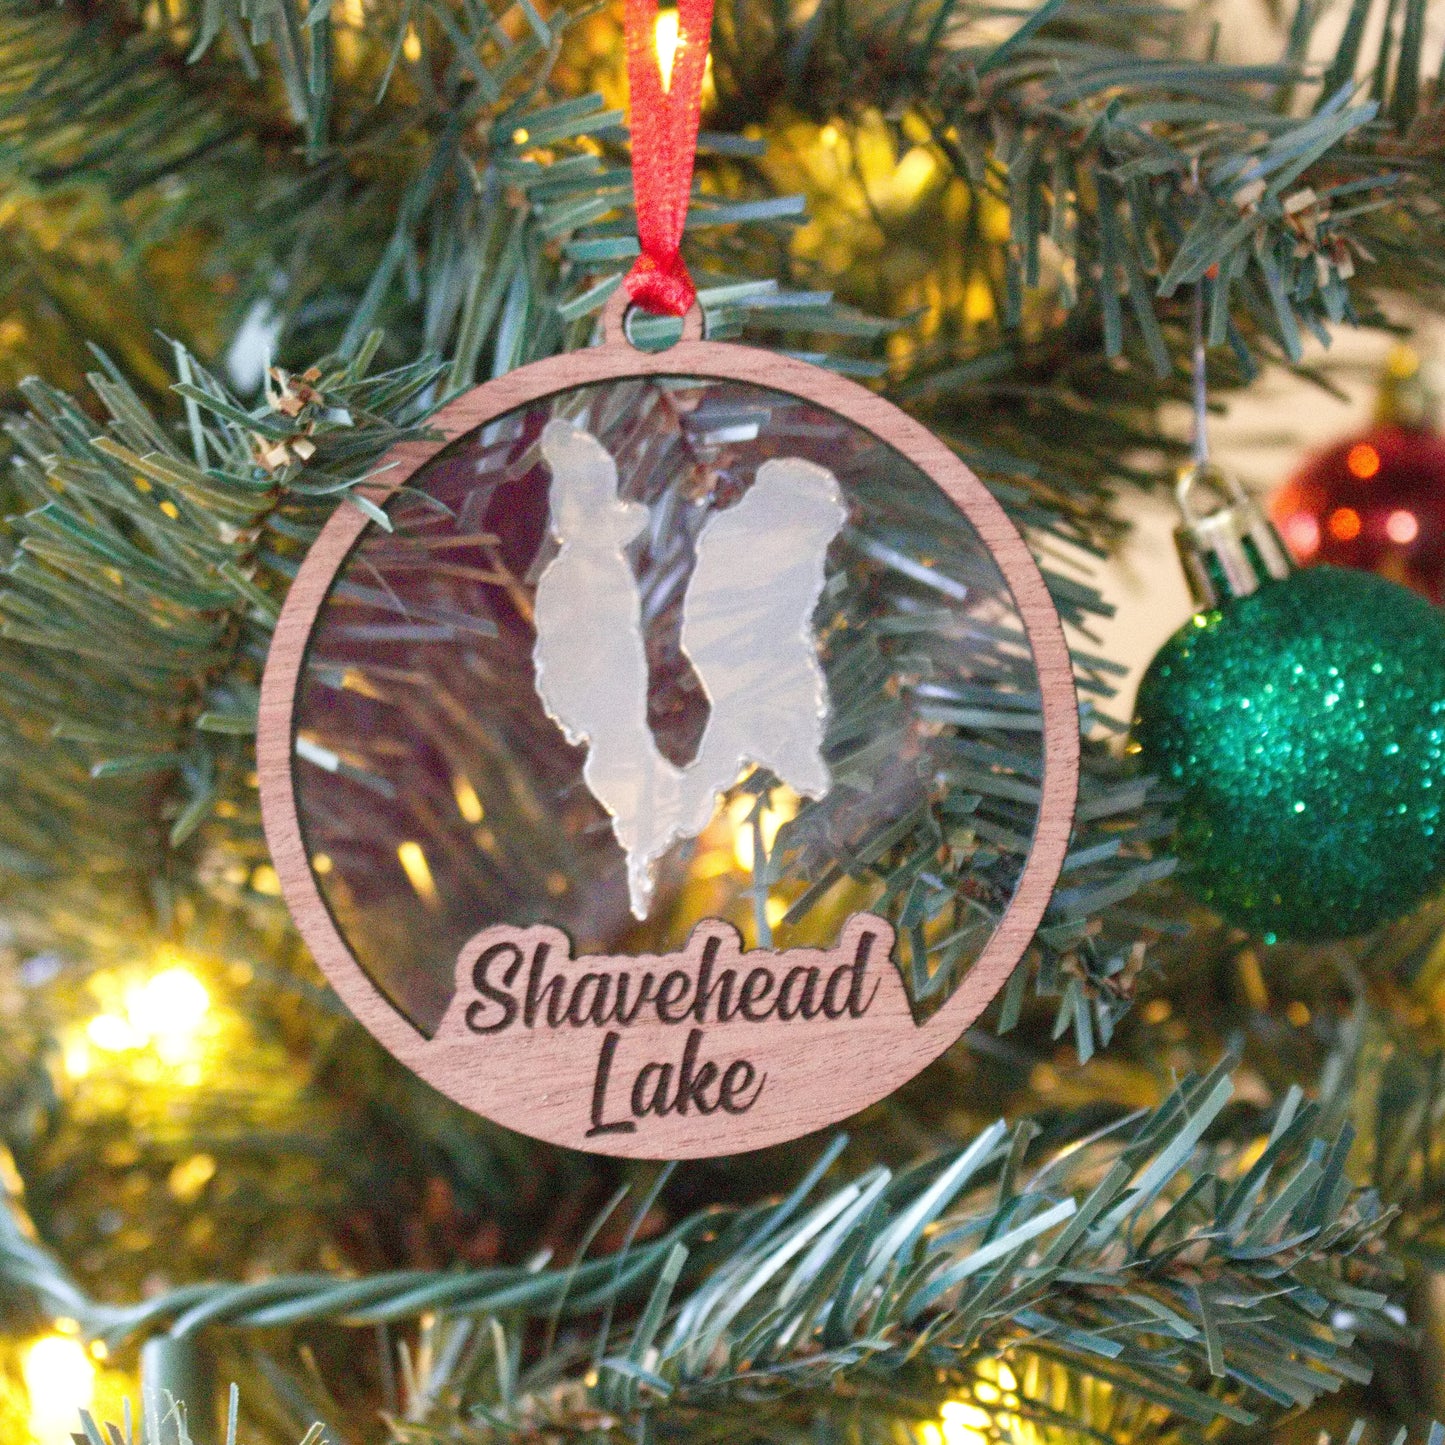 Shavehead Lake Acrylic and Wood Christmas Ornament.  Great for a personalized and custom gift for grandparents, parents, or children.    